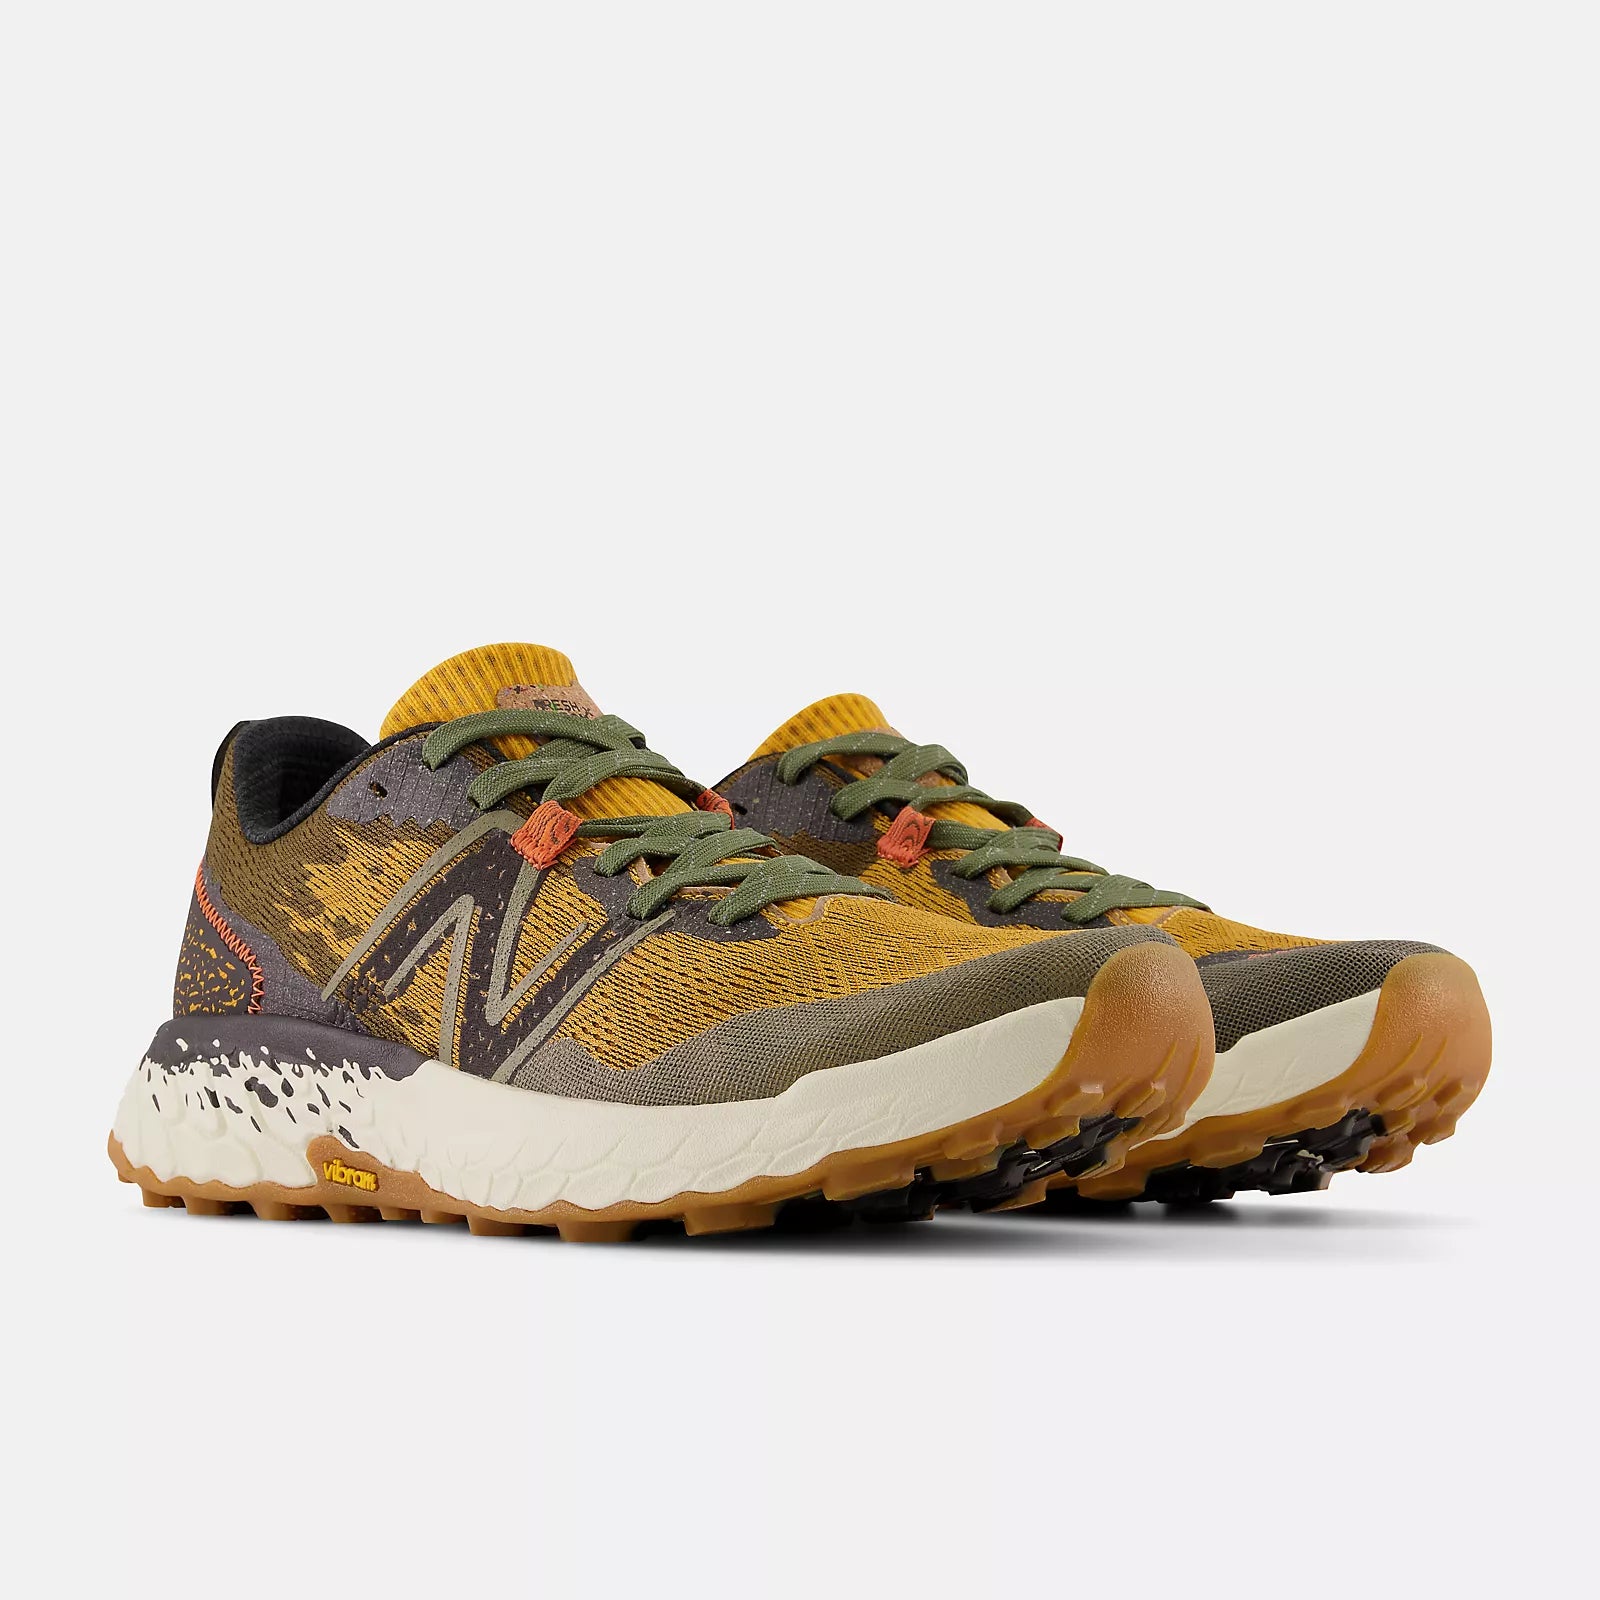 Front angled view of the Men's Hierro V7 trail runner by New Balance in the color Golden hour/Dark Camo/Black